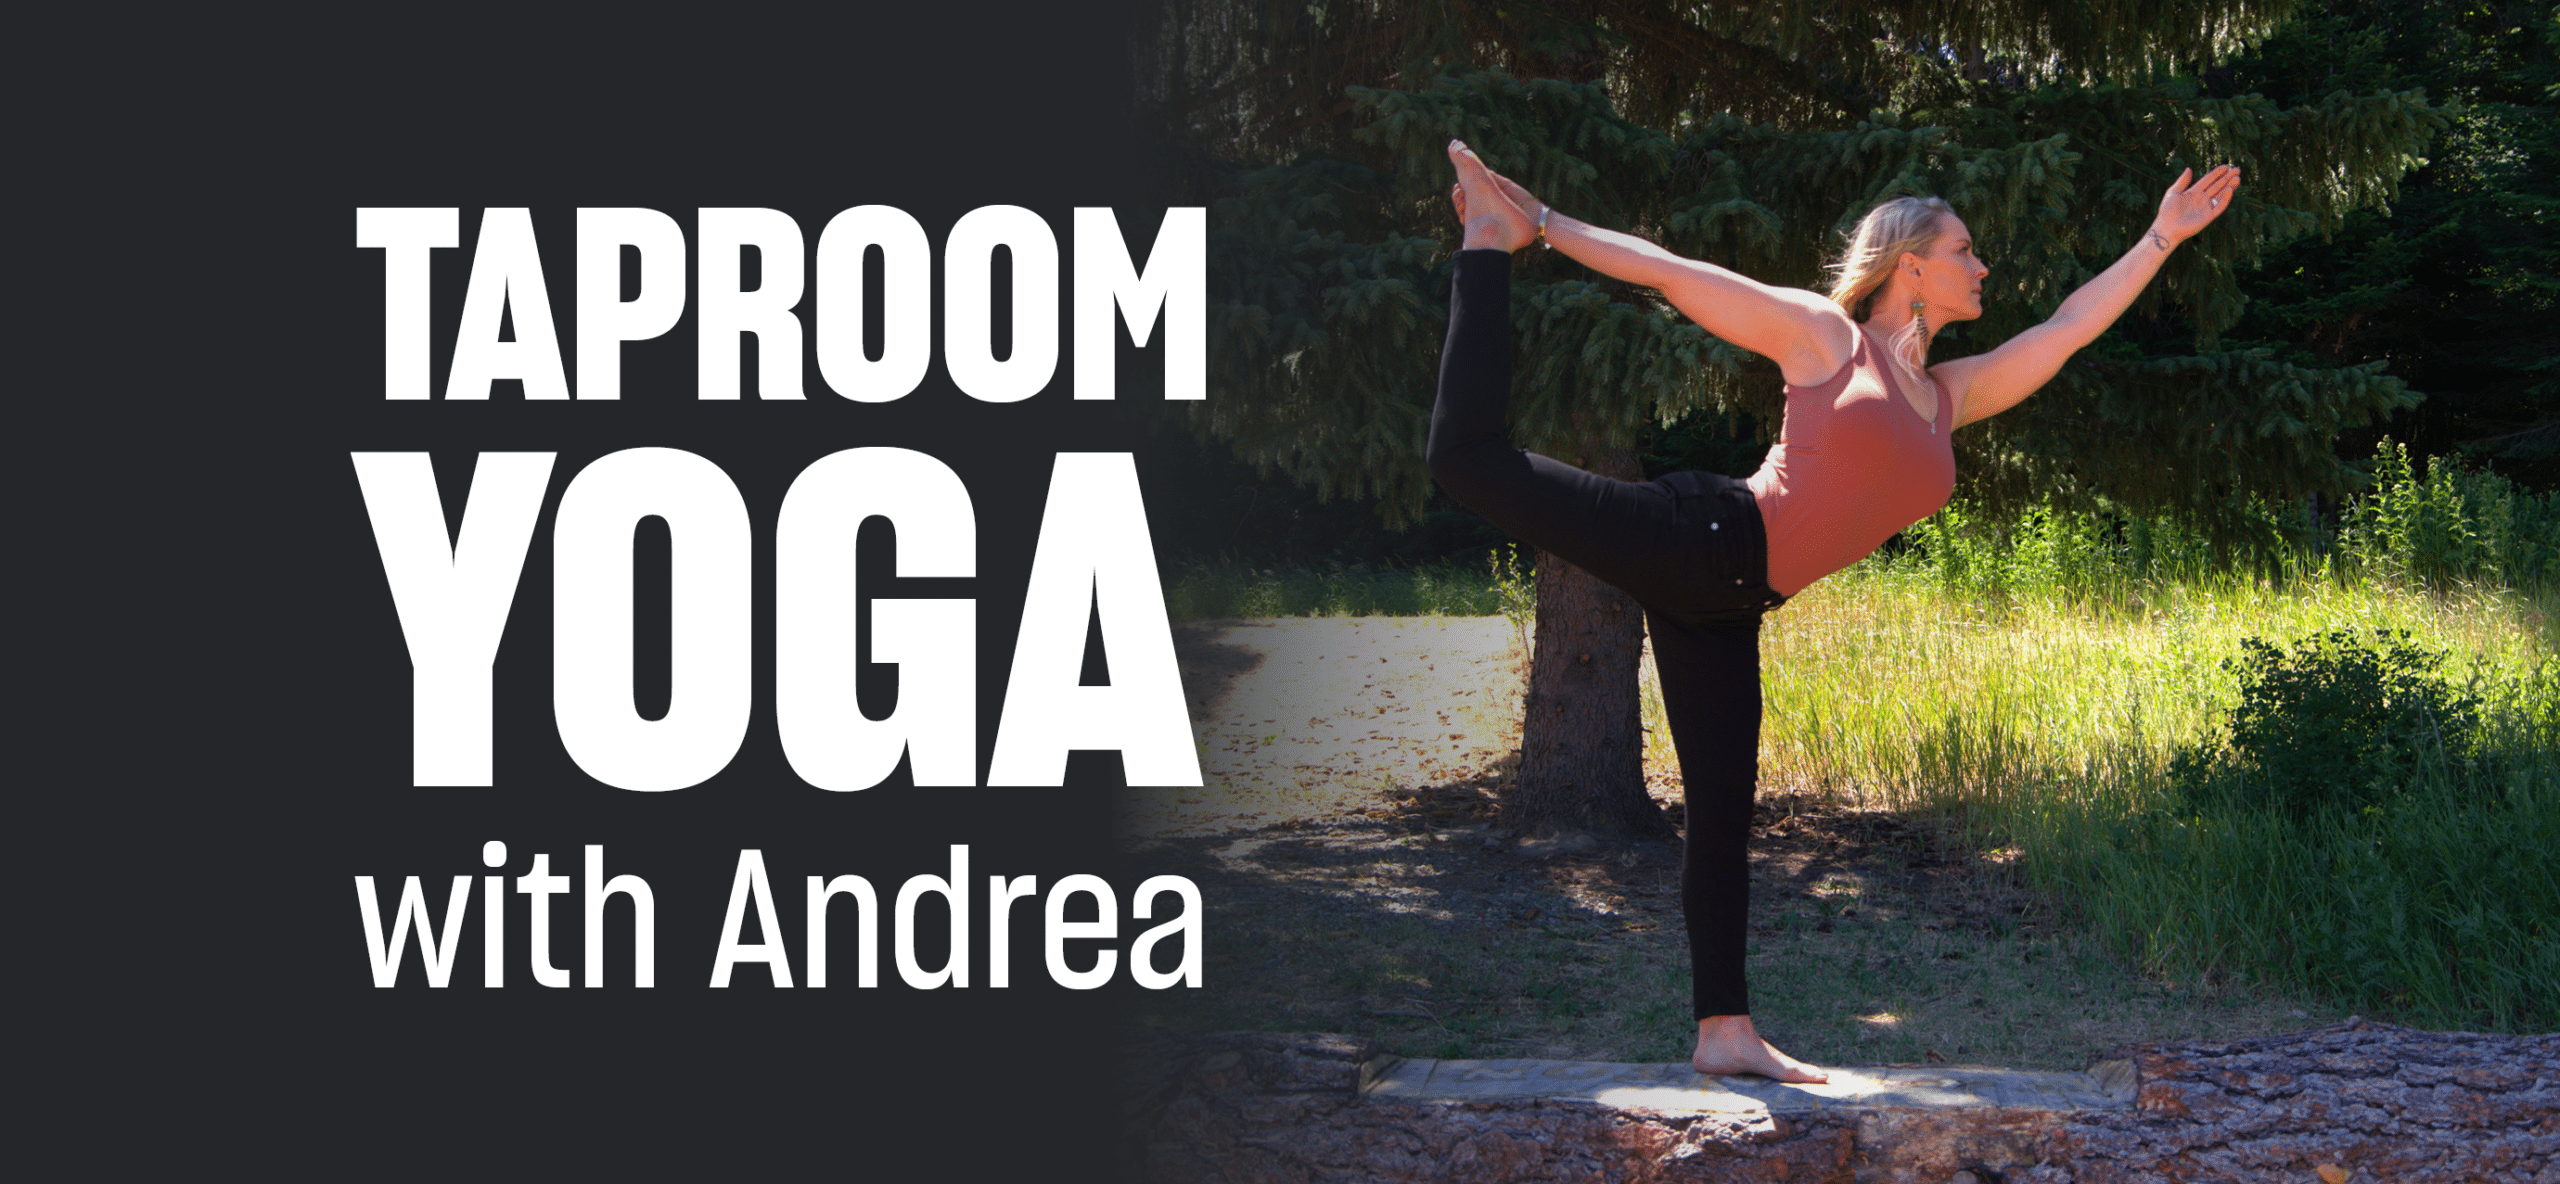 Taproom Yoga with Andrea